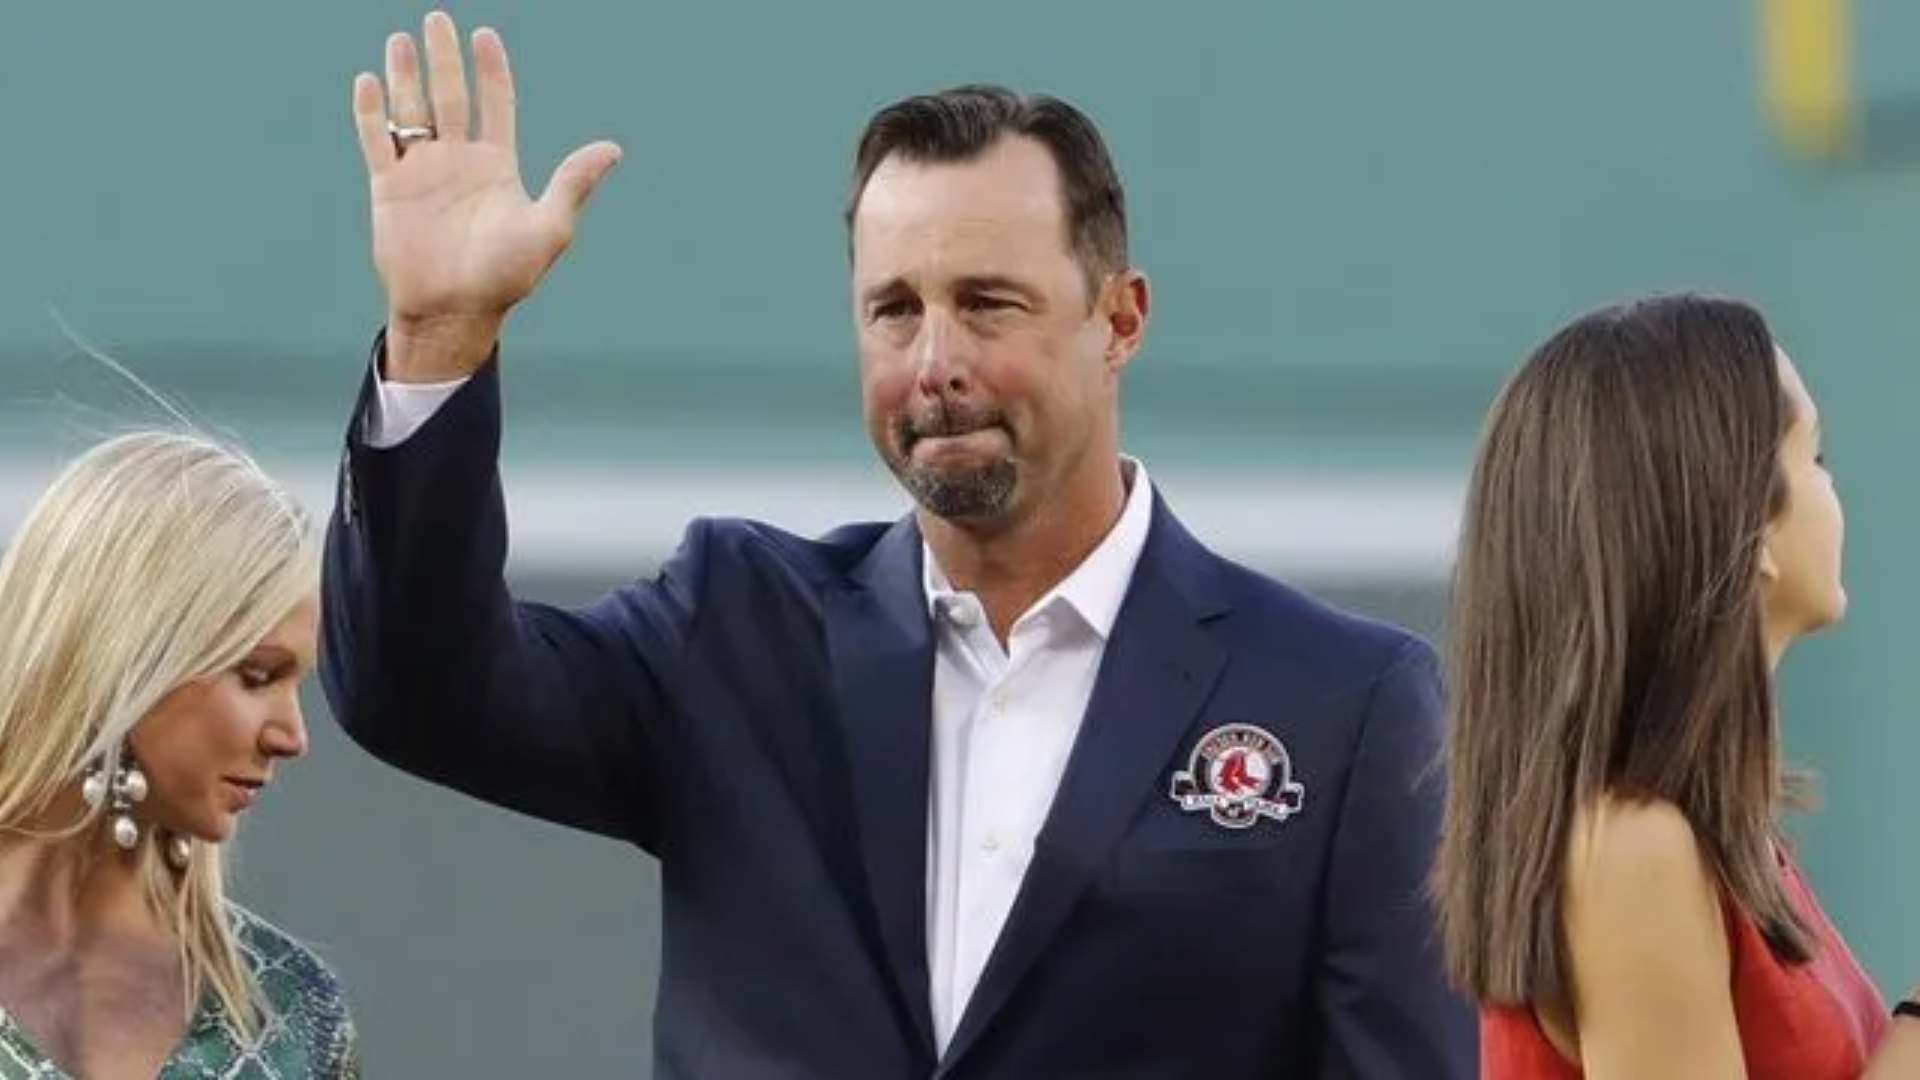 Mike Lowell Mourns Loss Of Ex-Red Sox Teammate Tim Wakefield